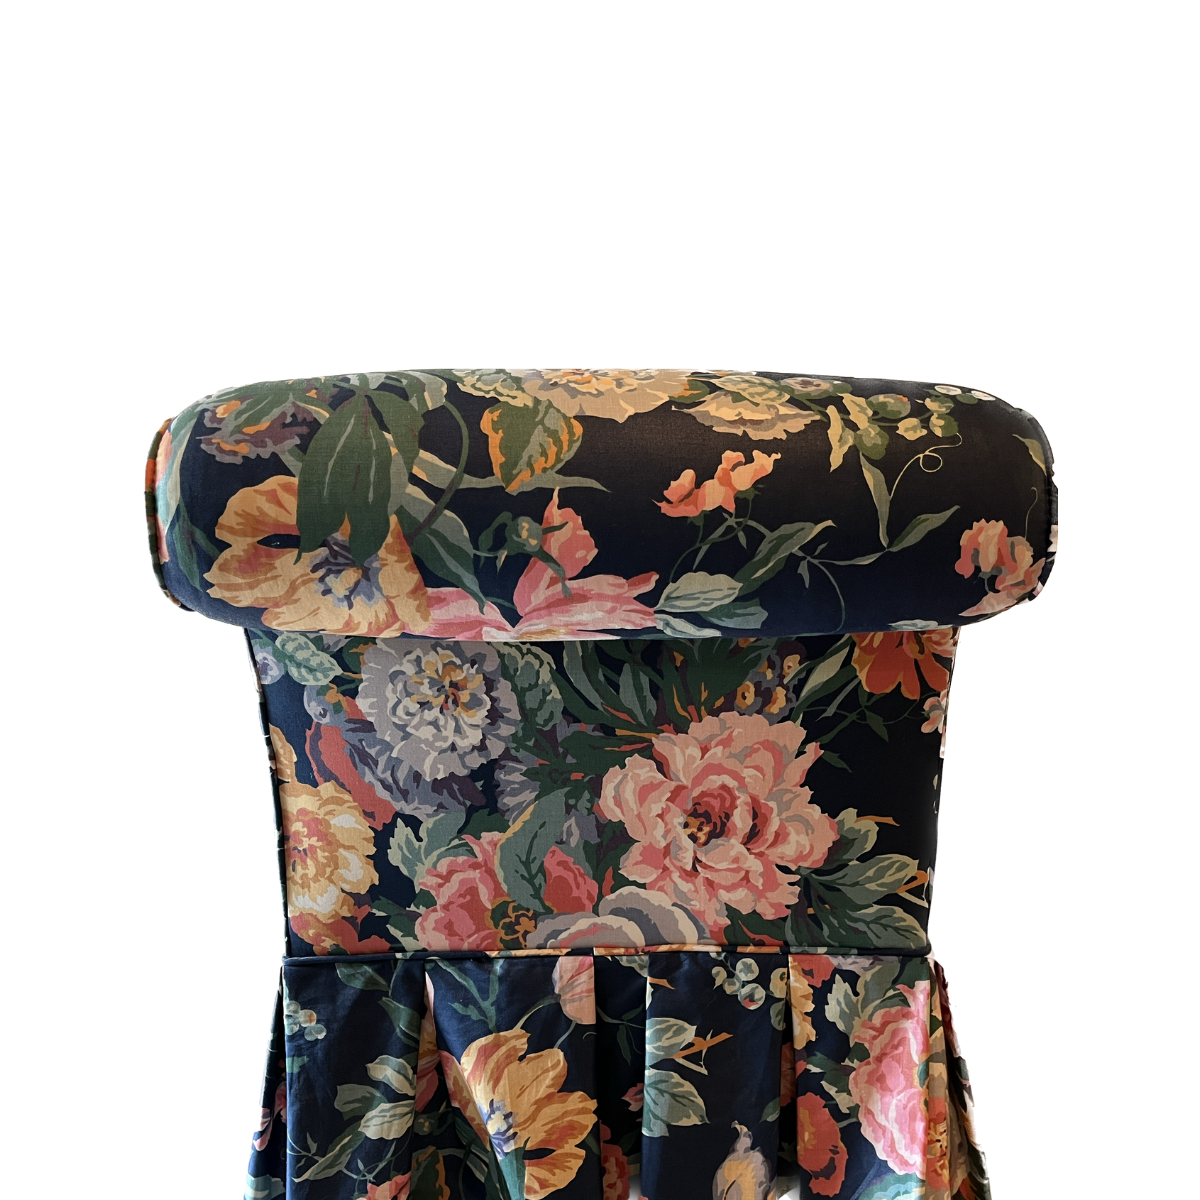 Skirted Rose-Patterned Chintz Bench